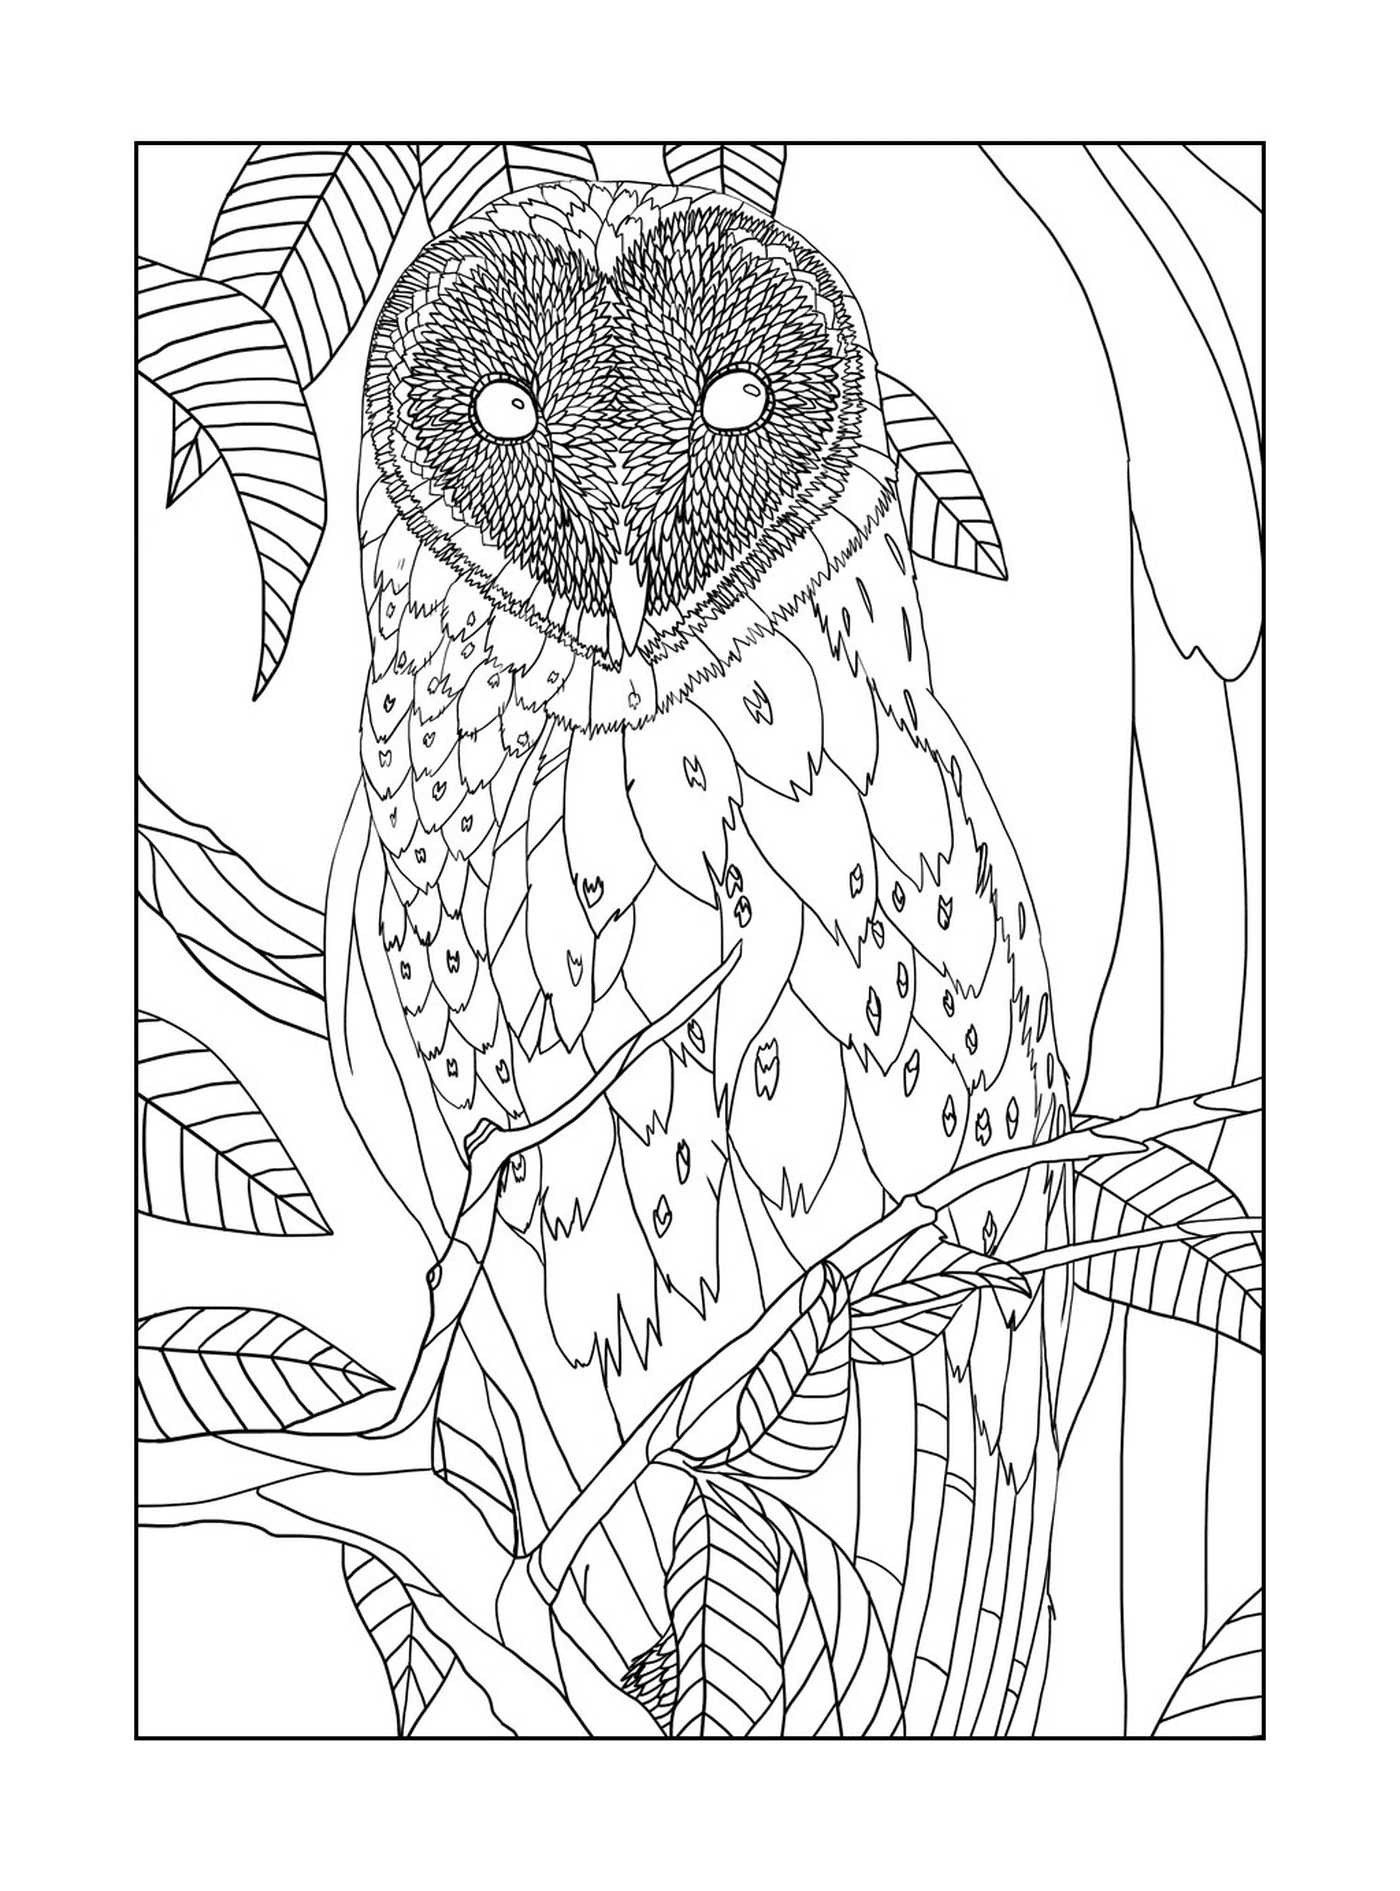  An owl sitting on a tree branch 